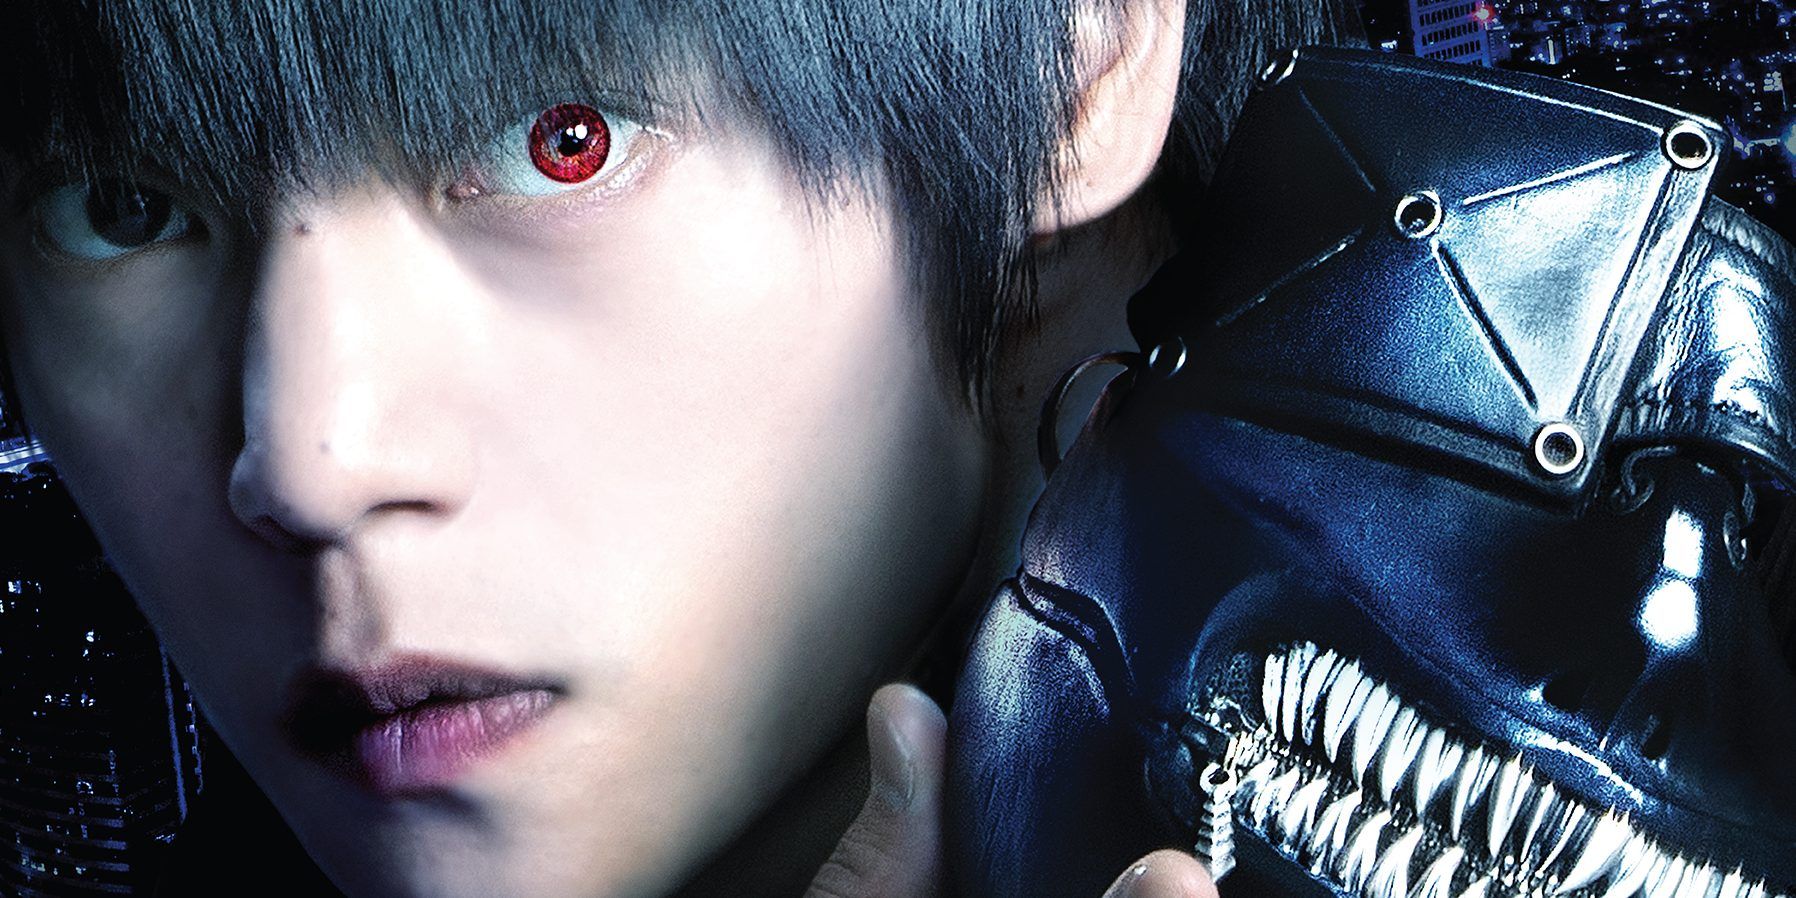 Tokyo Ghoul S - Wikipedia